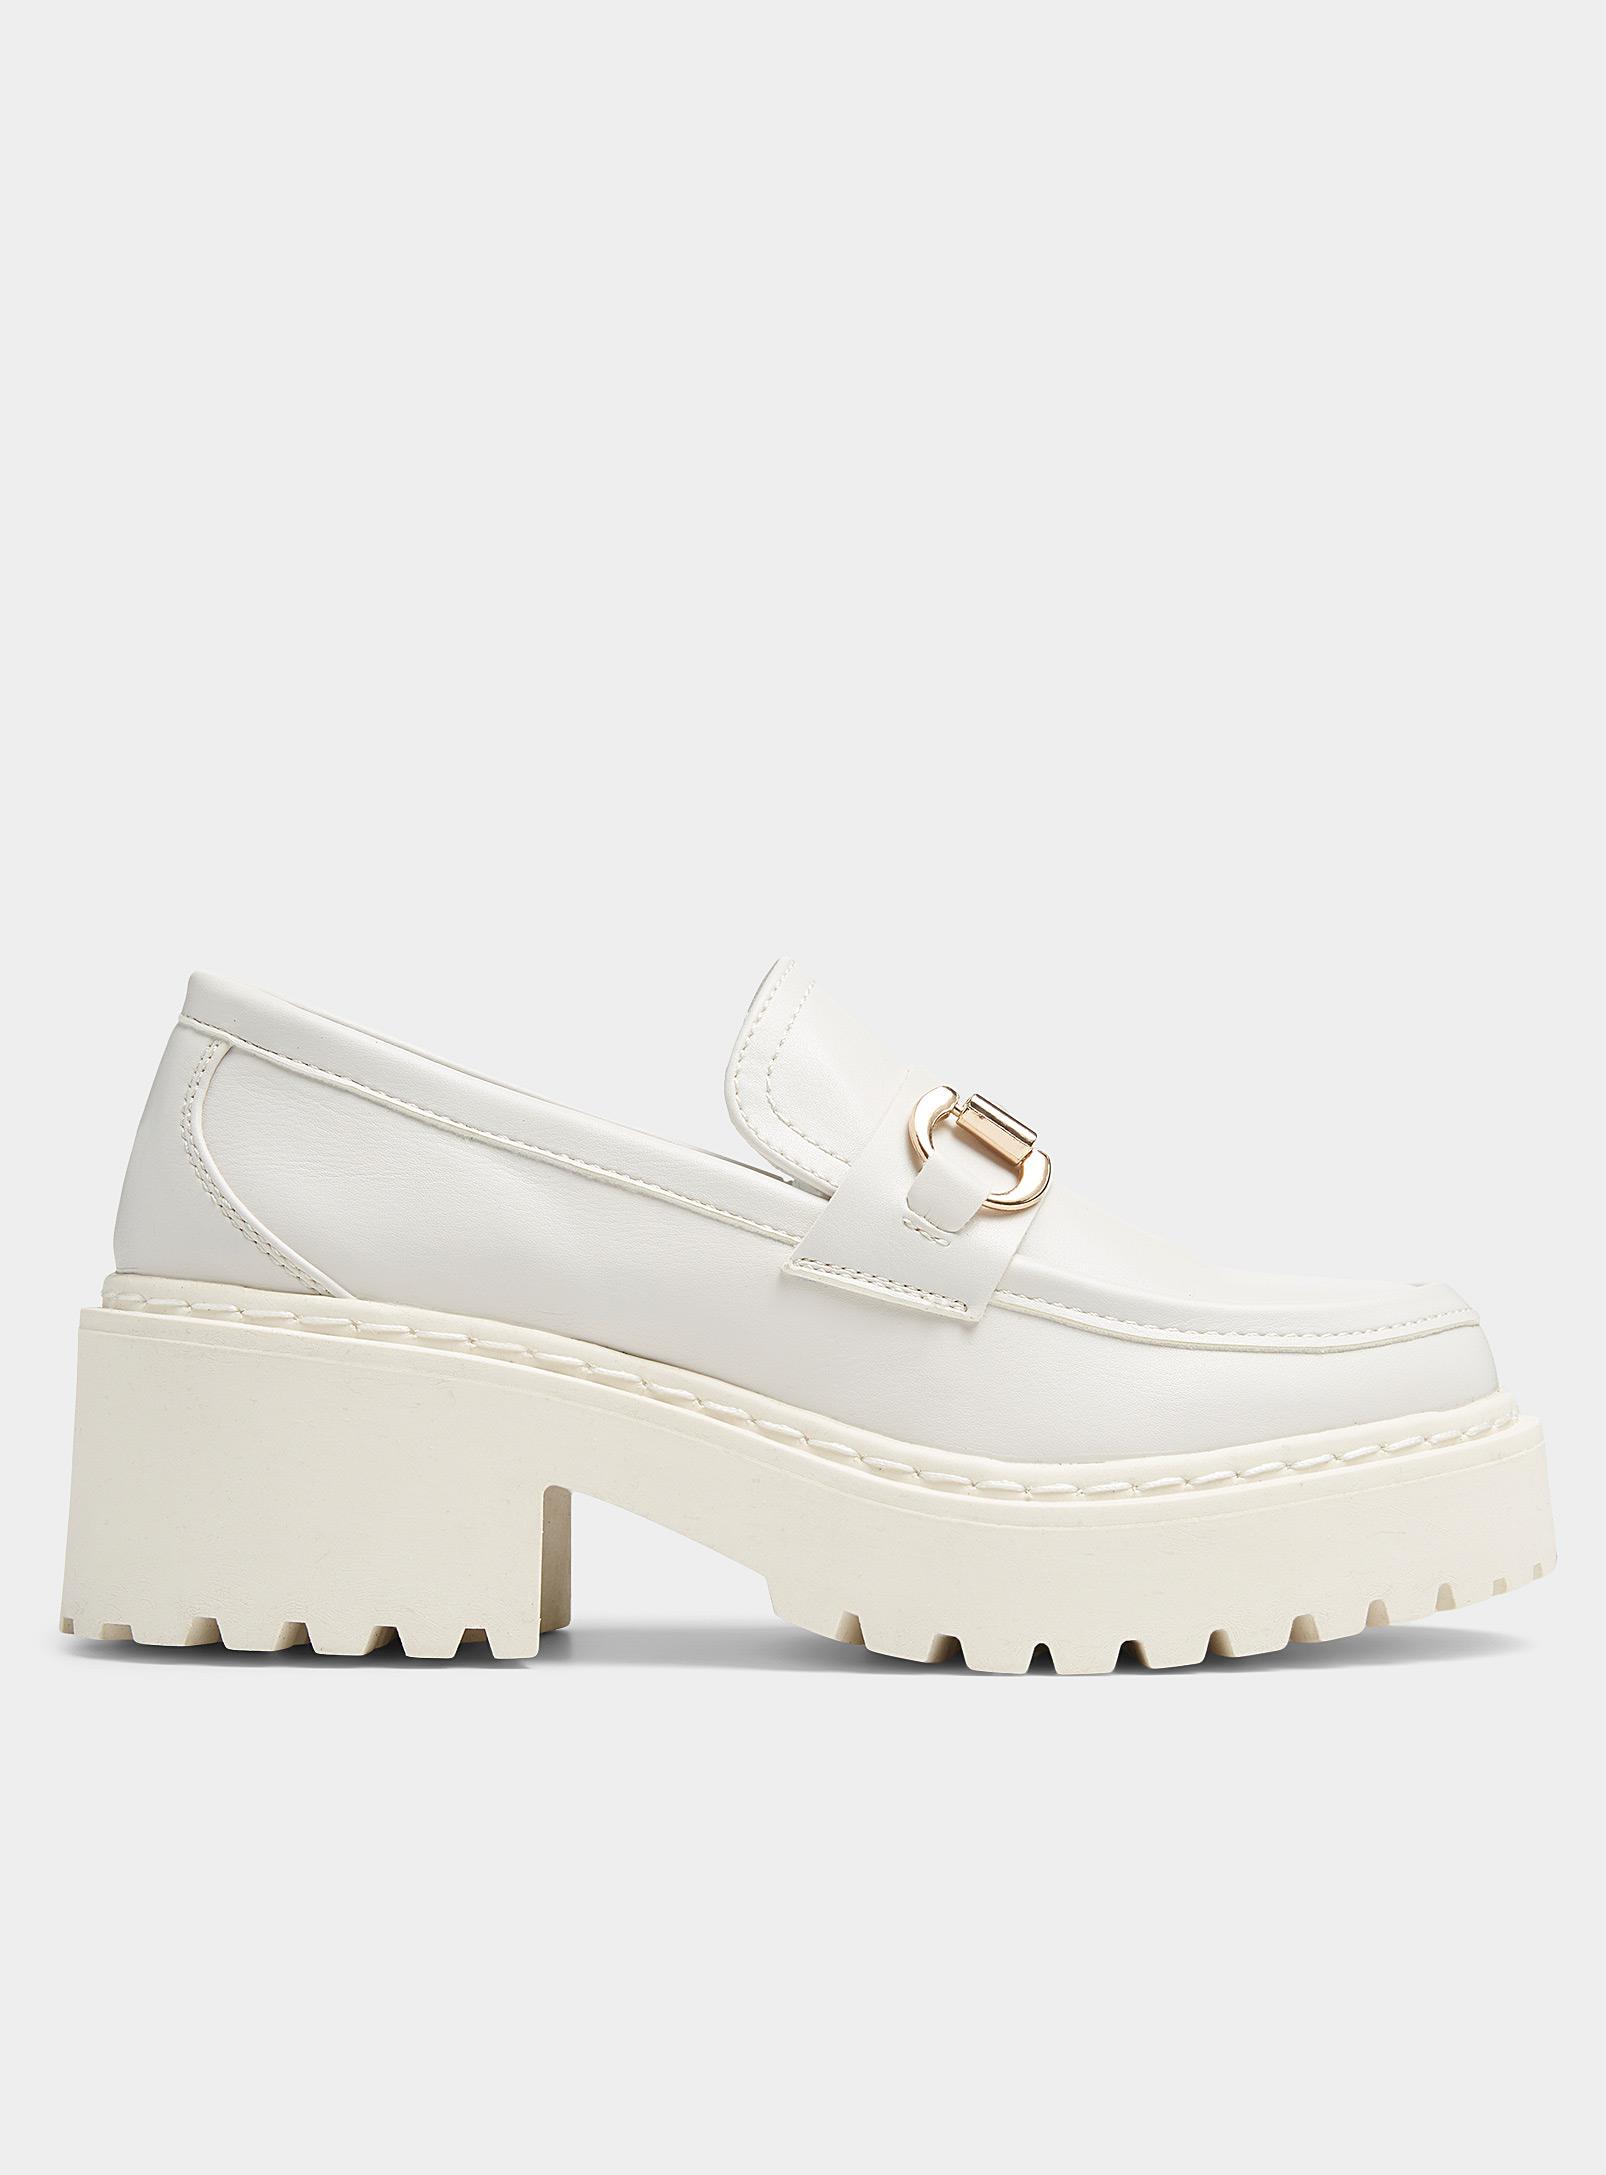 Steve Madden Approach Platform Loafers in White | Lyst